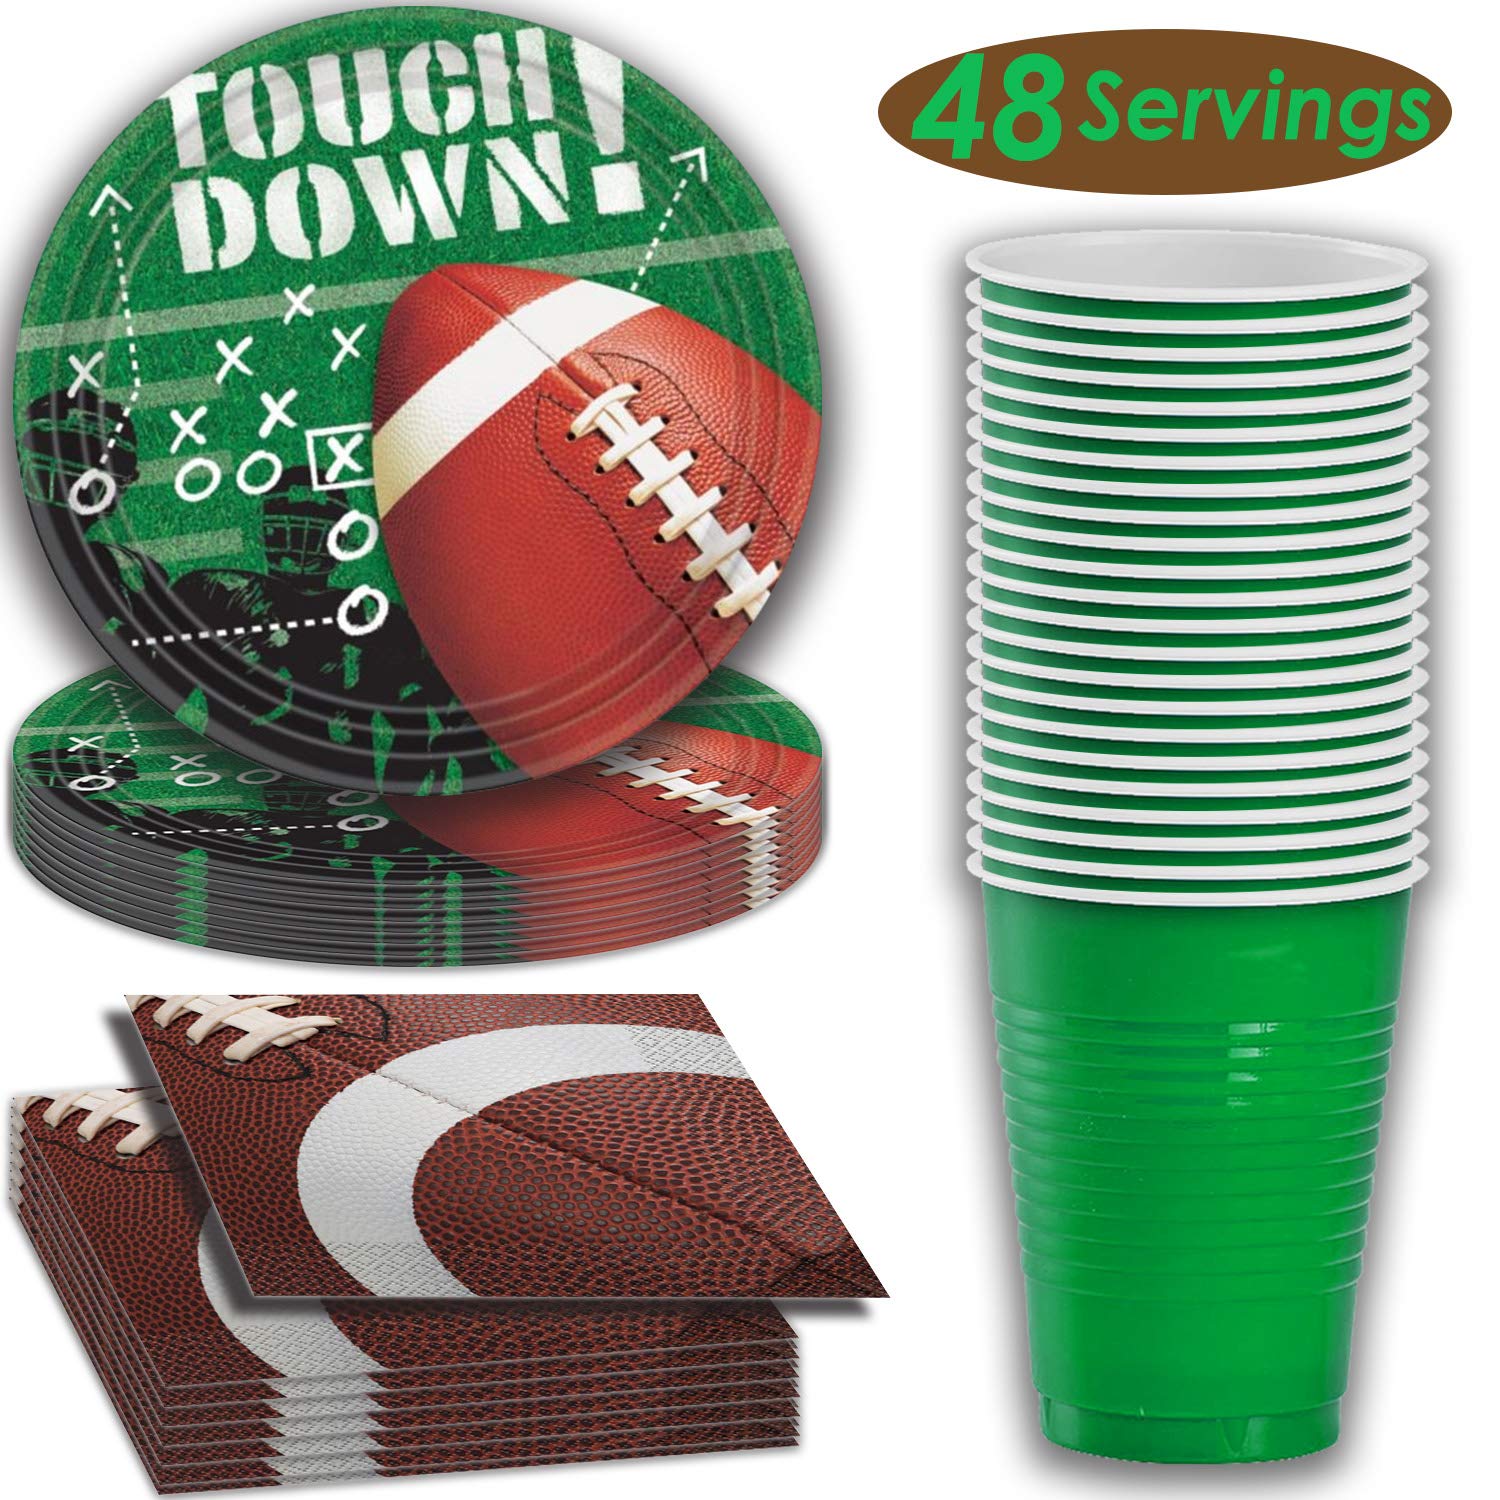 Touch Down plate, napkins and cups